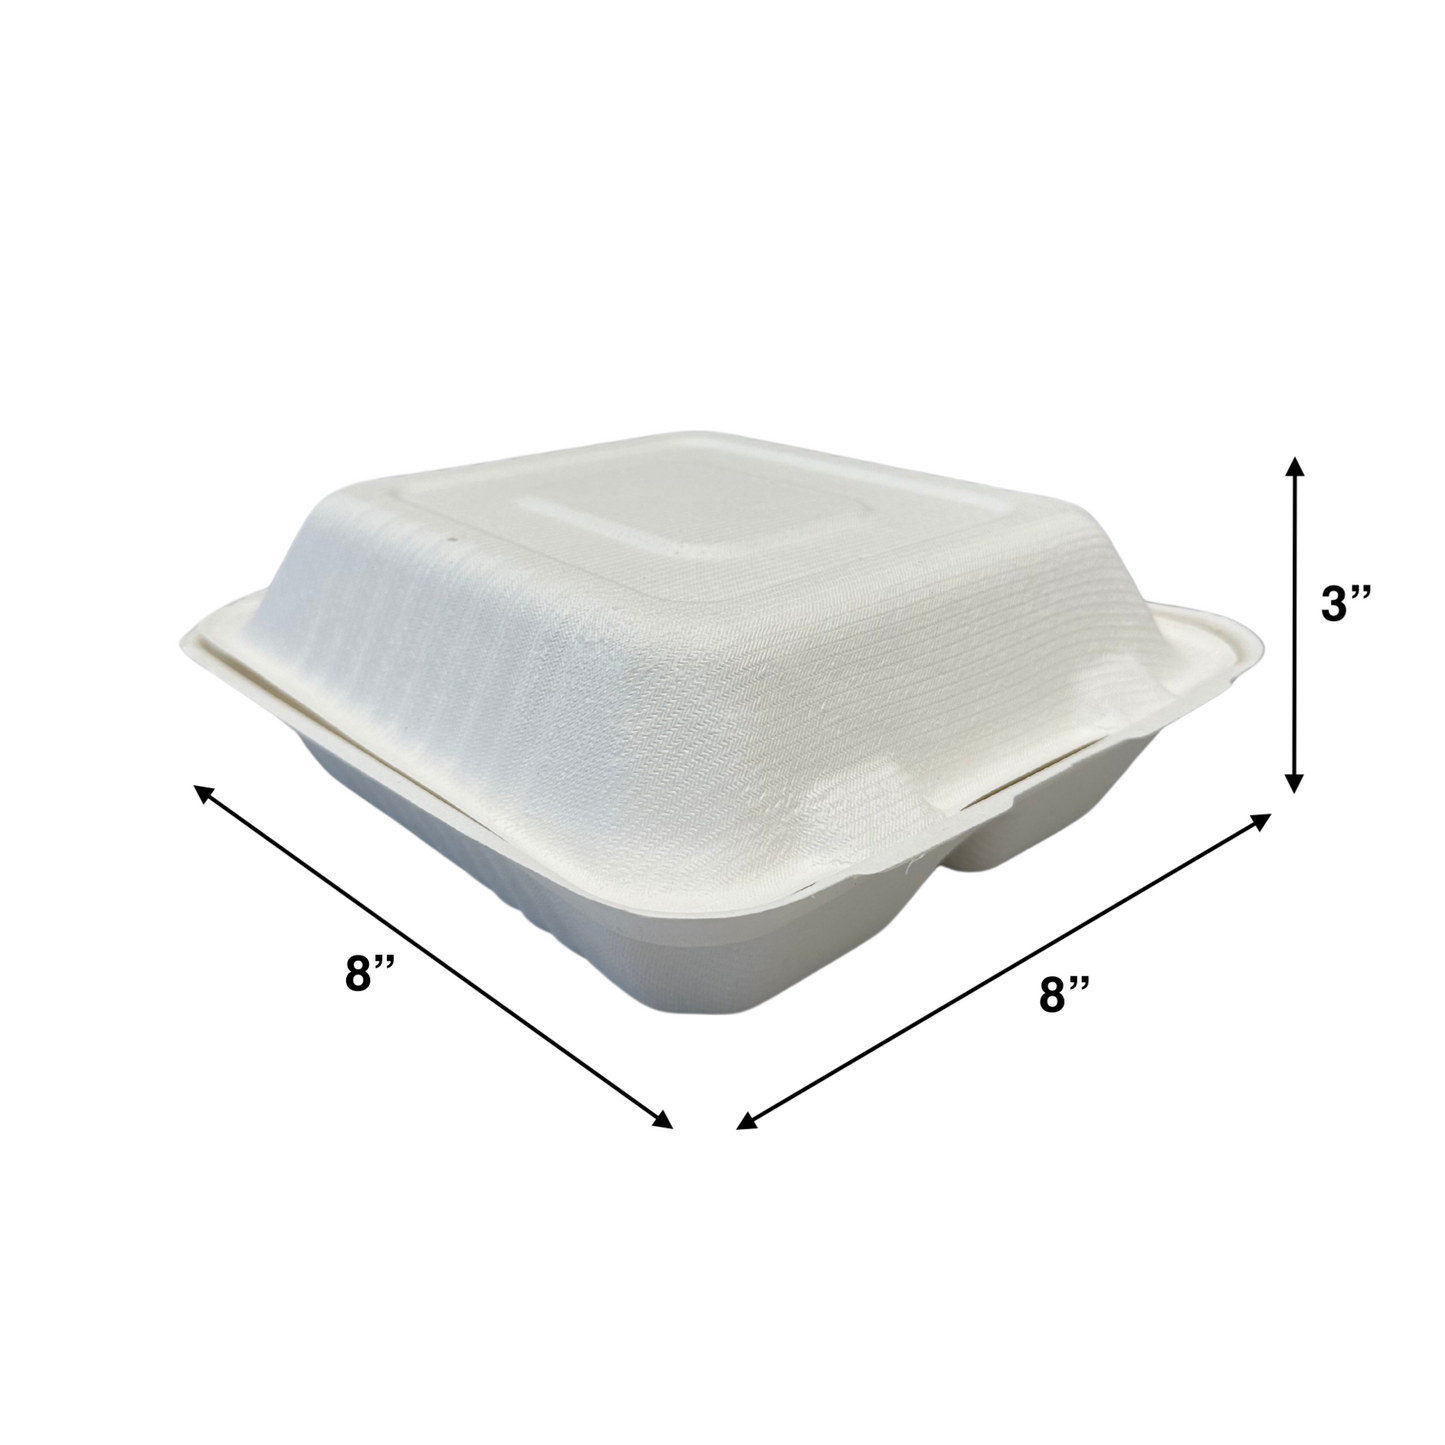 KIS-S8832 | 8x8x3 inches, 2-Compartment, Sugarcane Clamshell Food Container; $0.200/pc